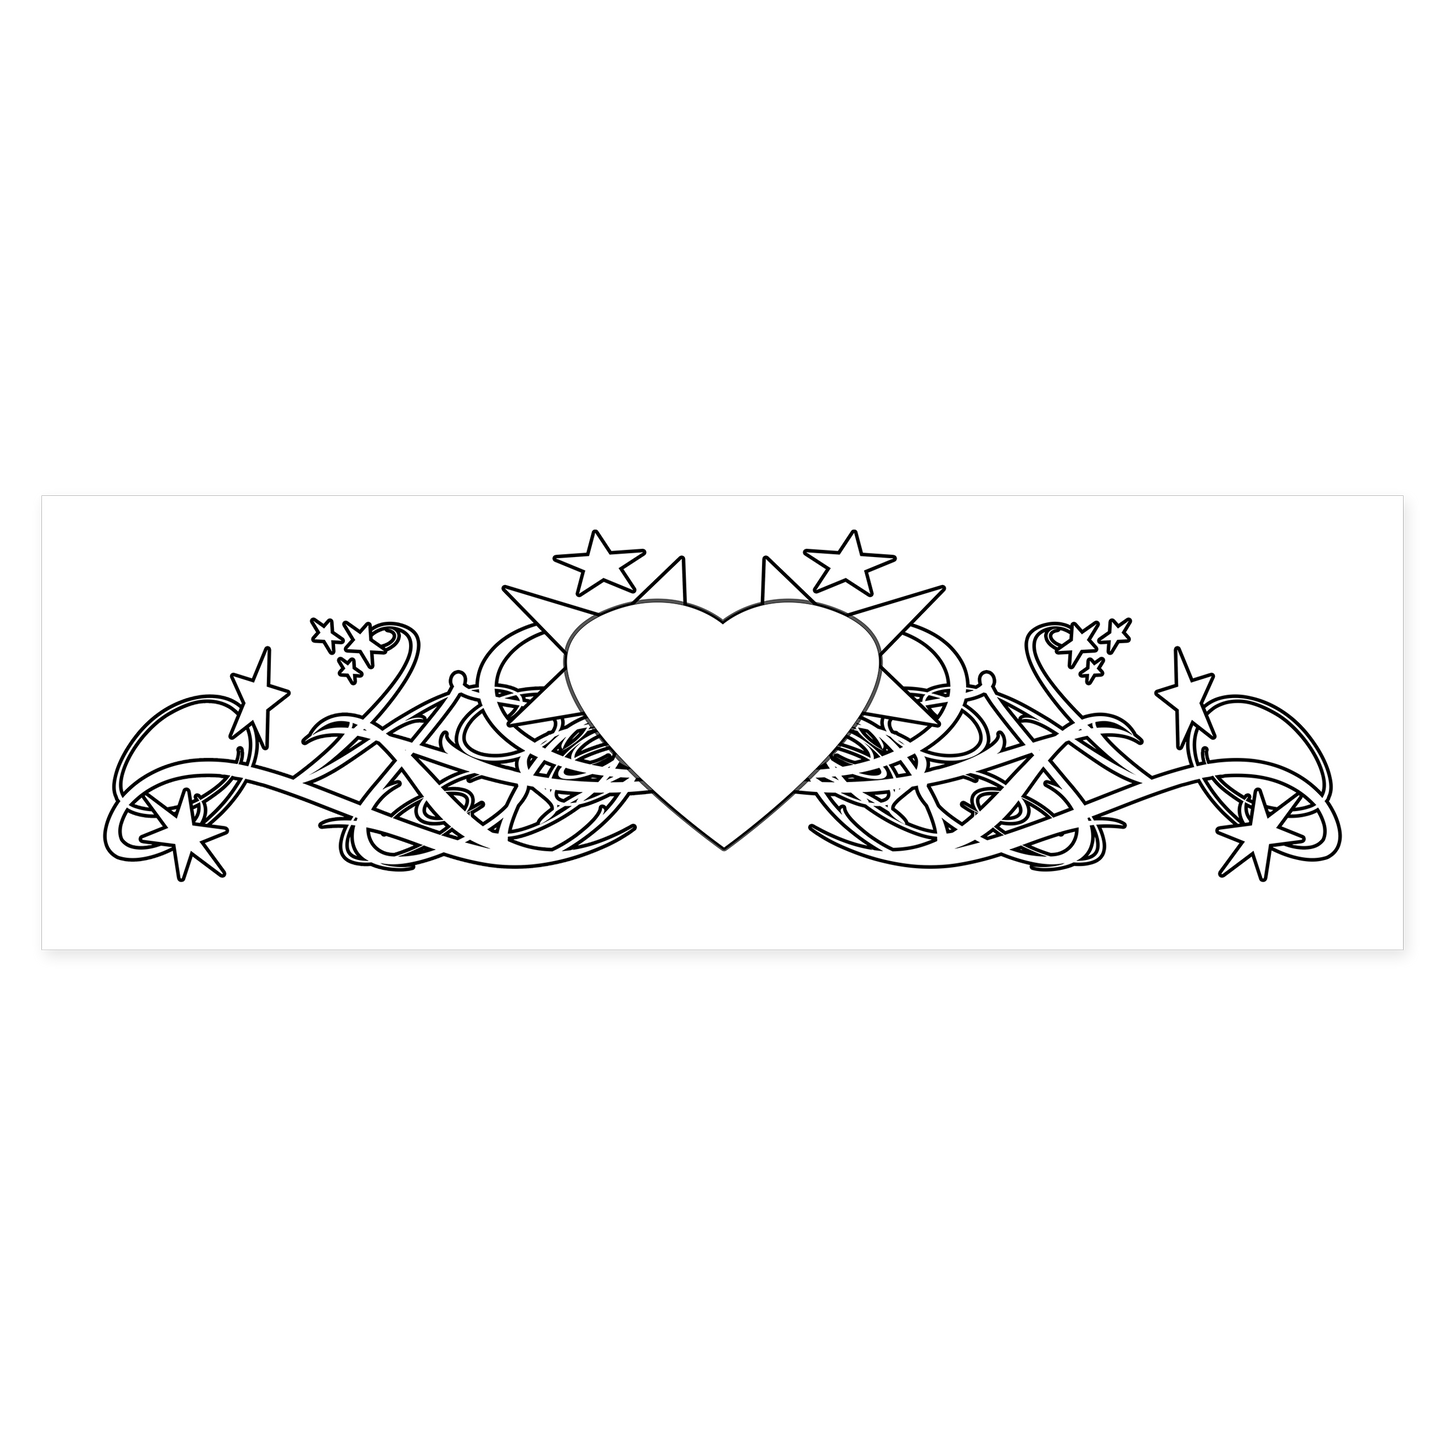 long tramp stamp sticker for the car in black in white, with hearts and stars | Car Tramp Stamp in Black & White | Baobei Label